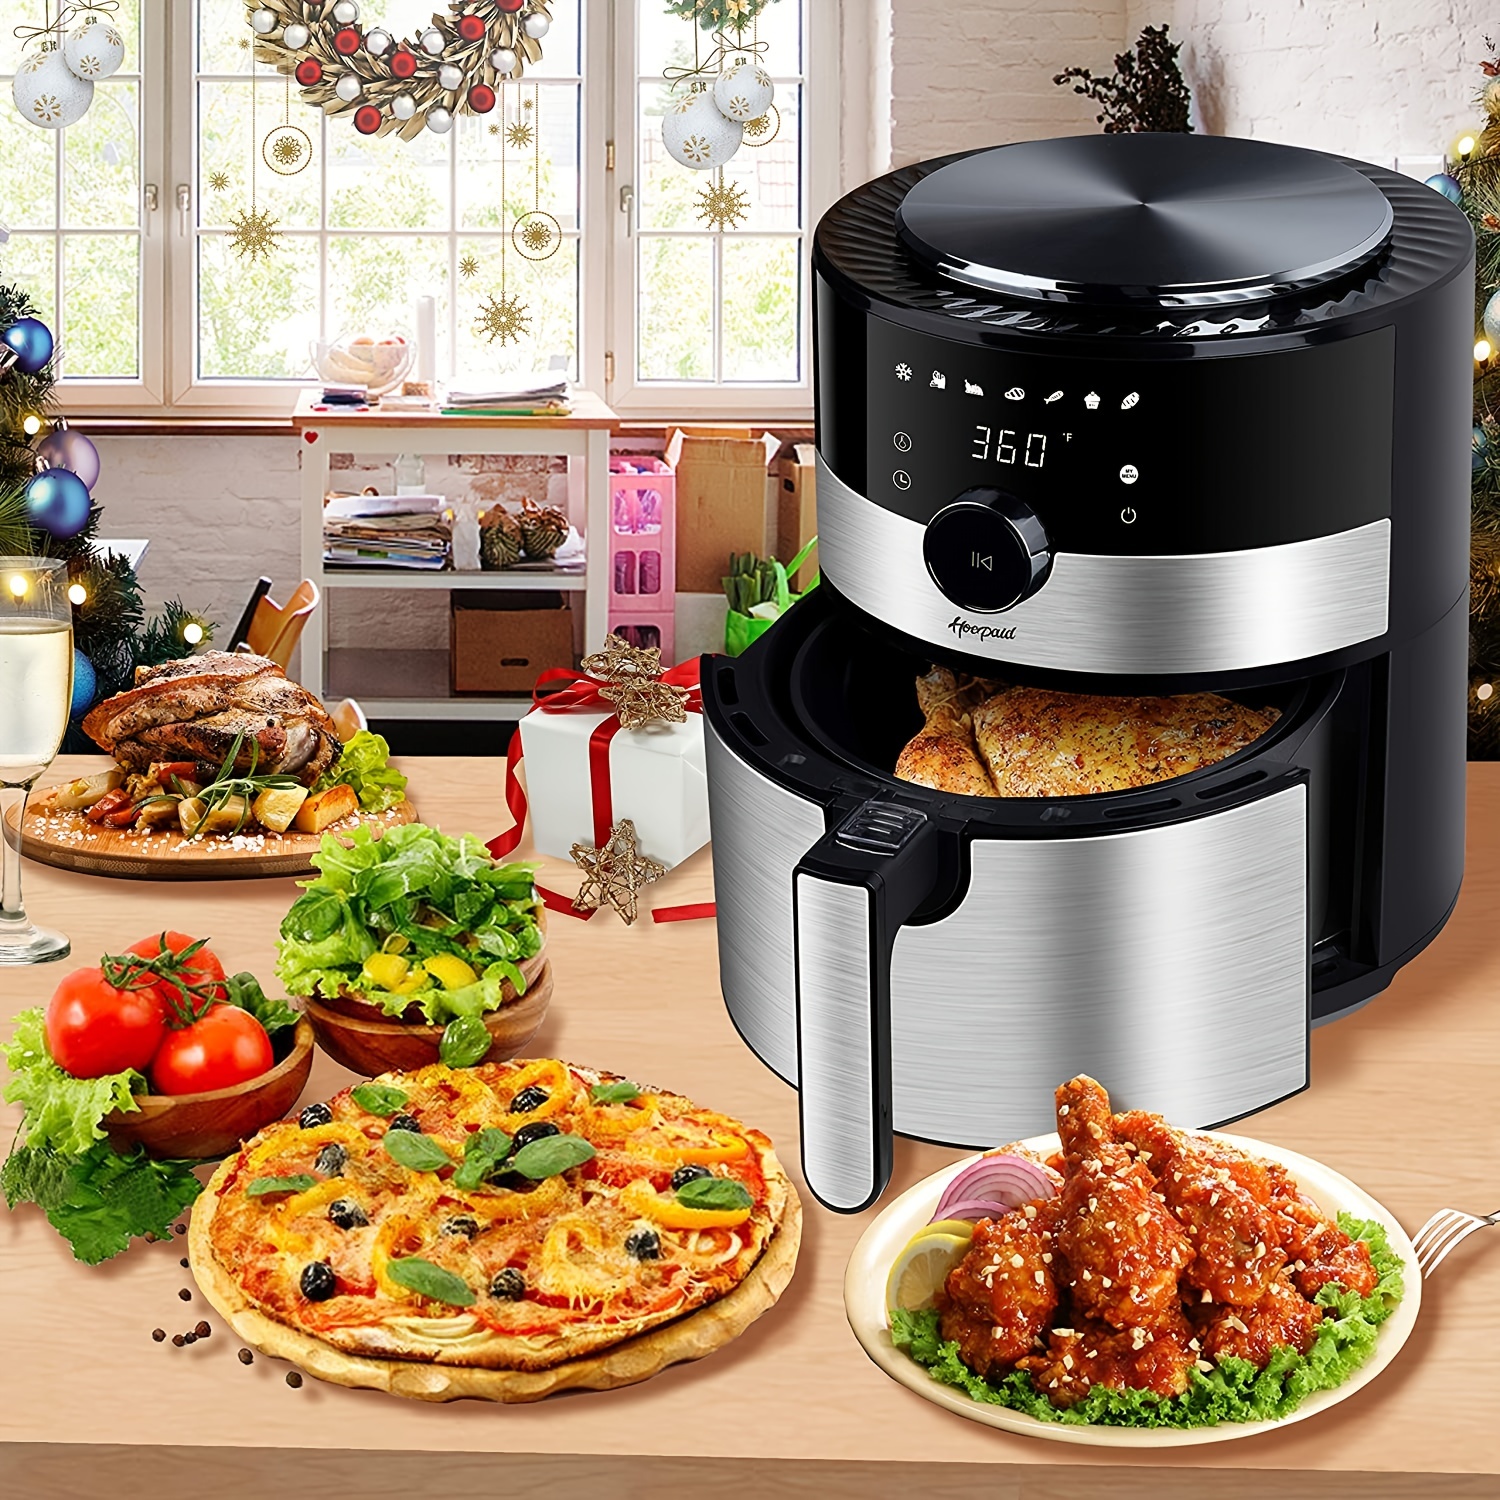 air fryer 3 6 quart family electric oilless hot air fryer oven with non stick basket and rack touch screen and knob 8 preset modes led display suitable for home party office 1350w details 1